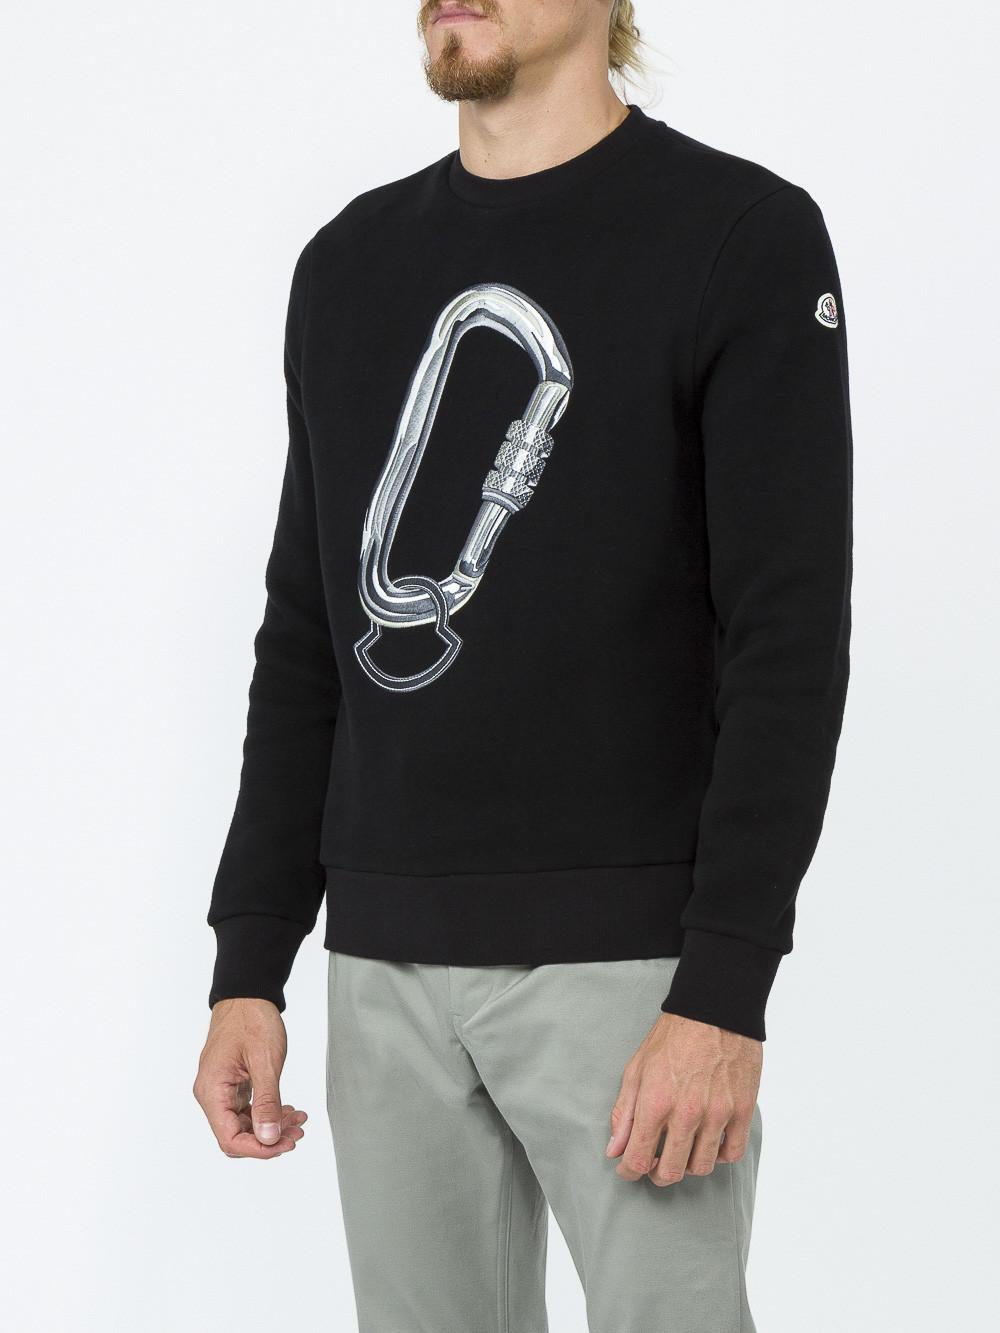 Moncler Cotton Printed Crew Neck Sweater in Black for Men - Lyst